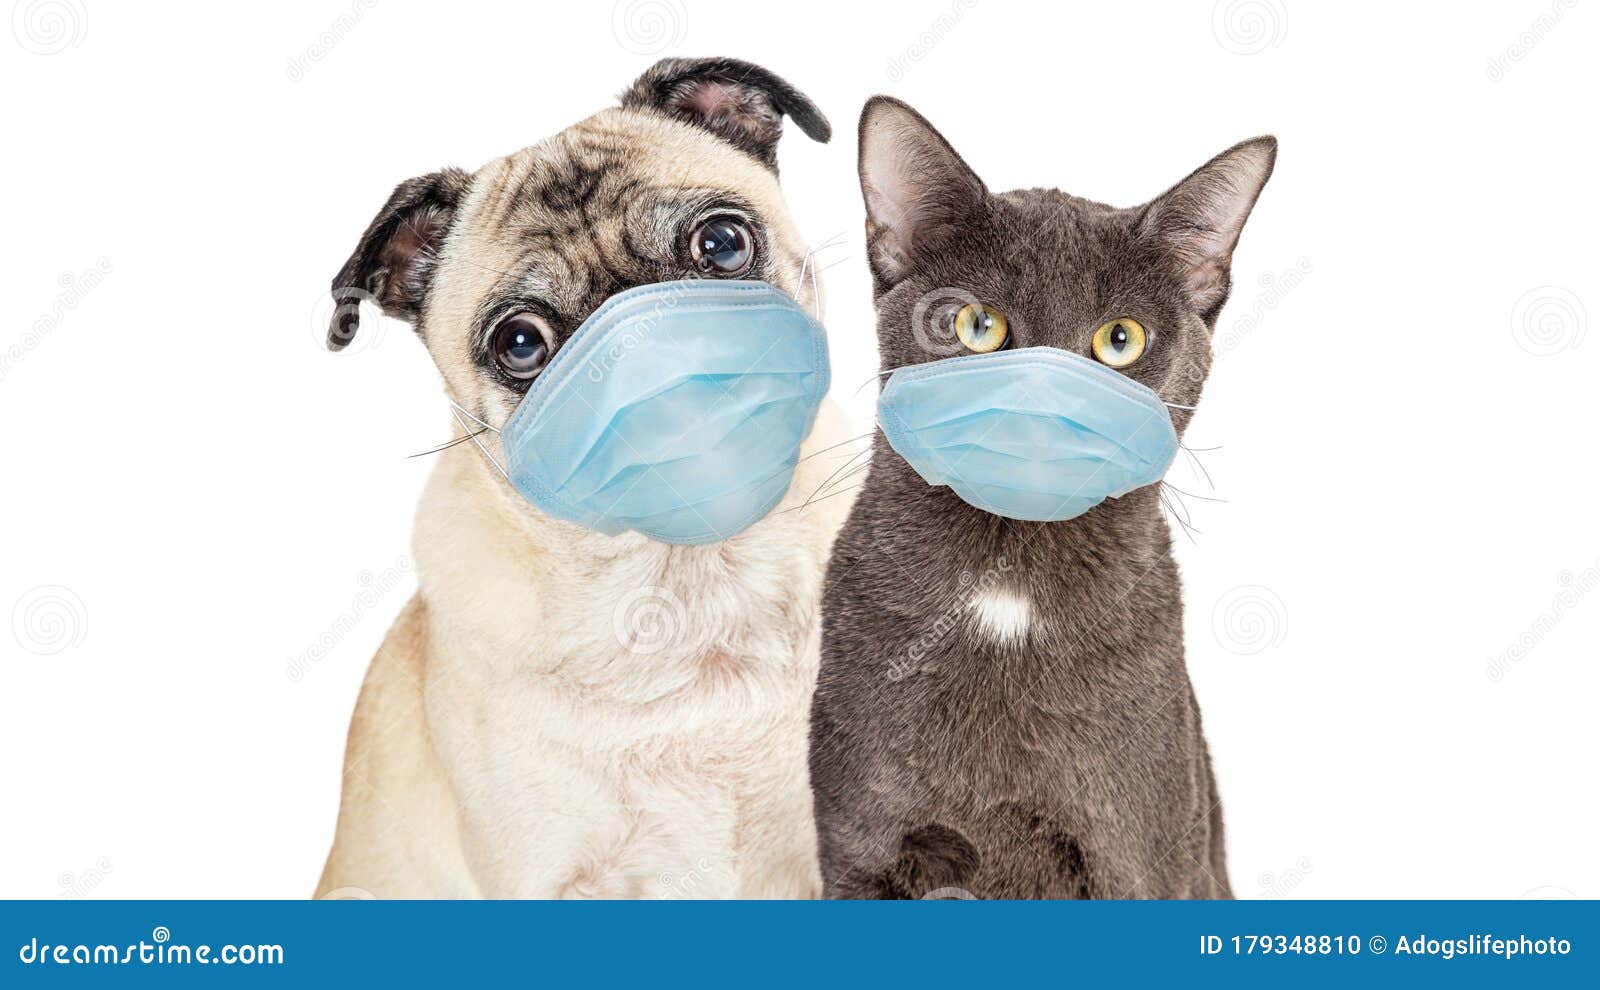 cat and dog wearing protective surgical face masks